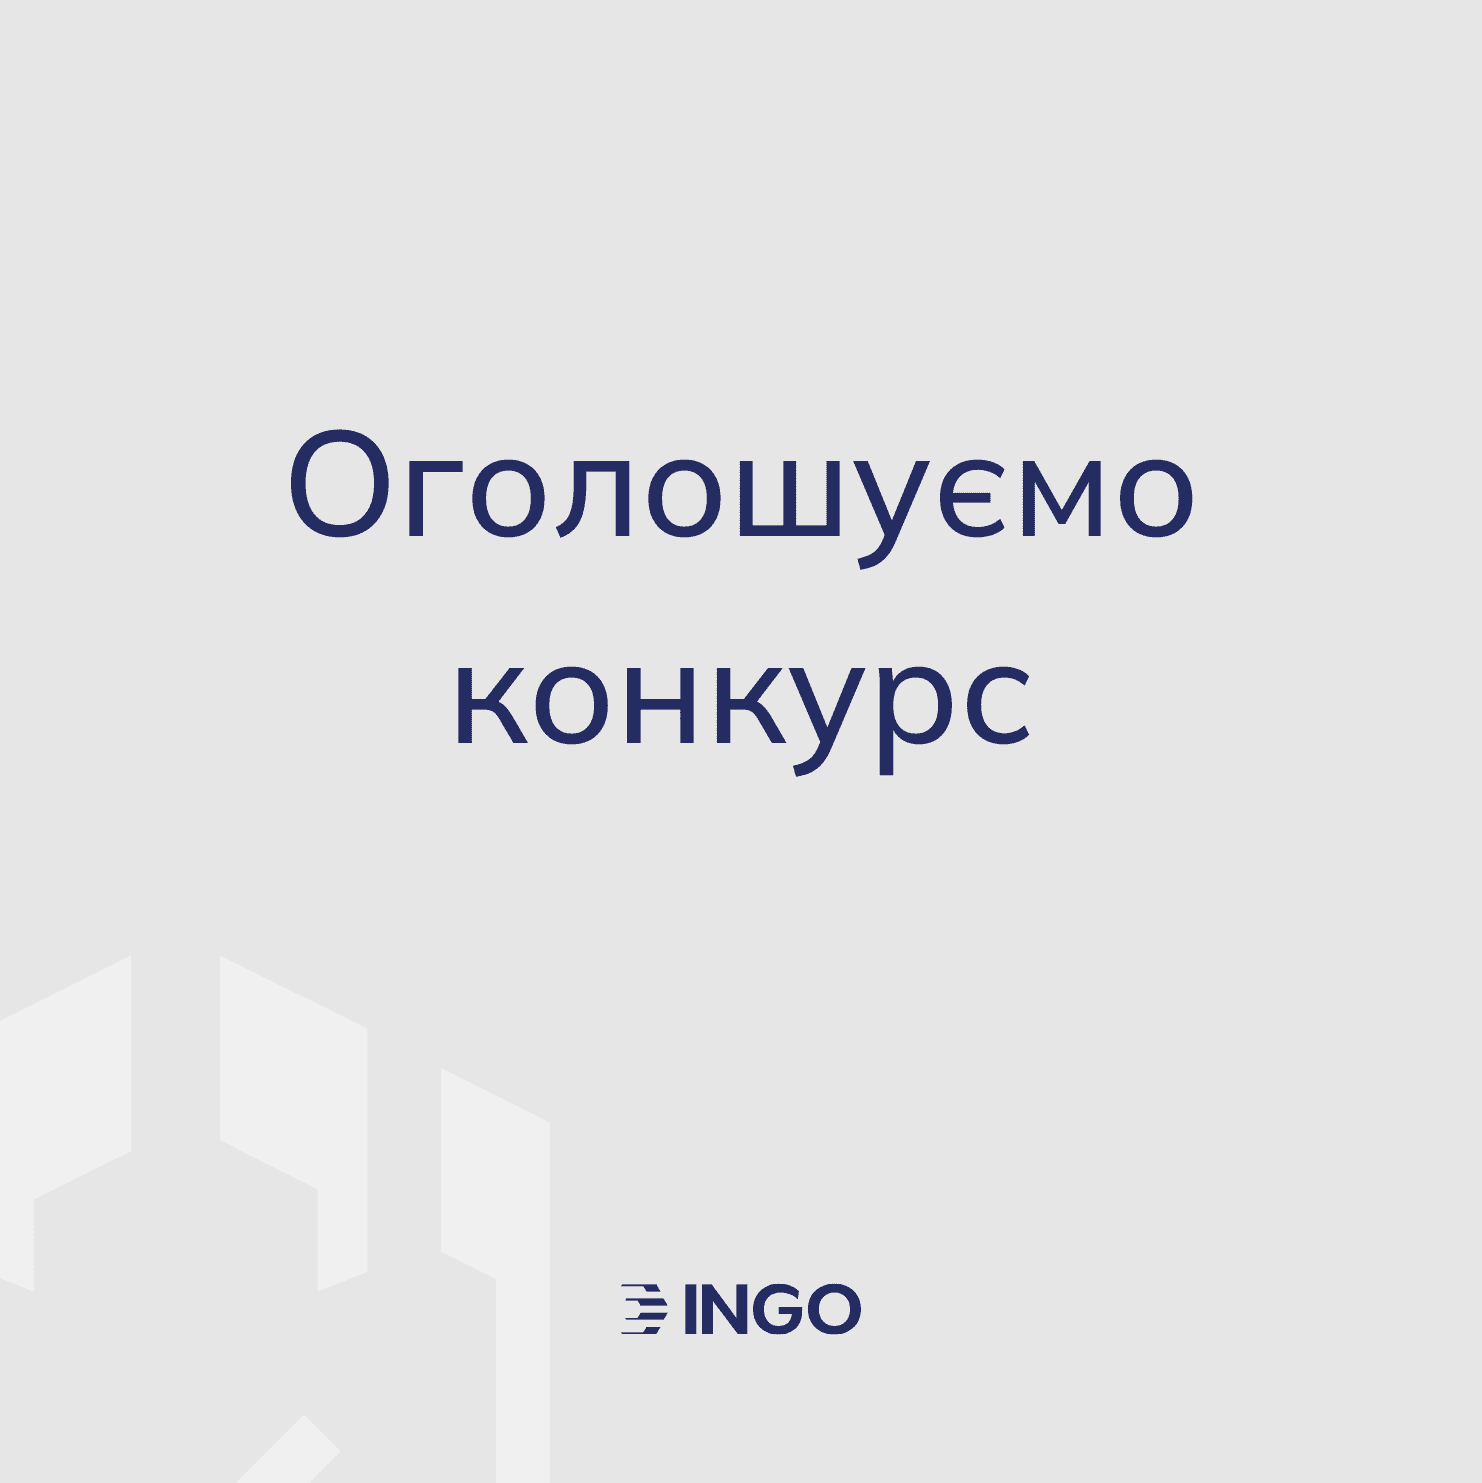 INGO announces an open tender to select a contractor to provide video content production services